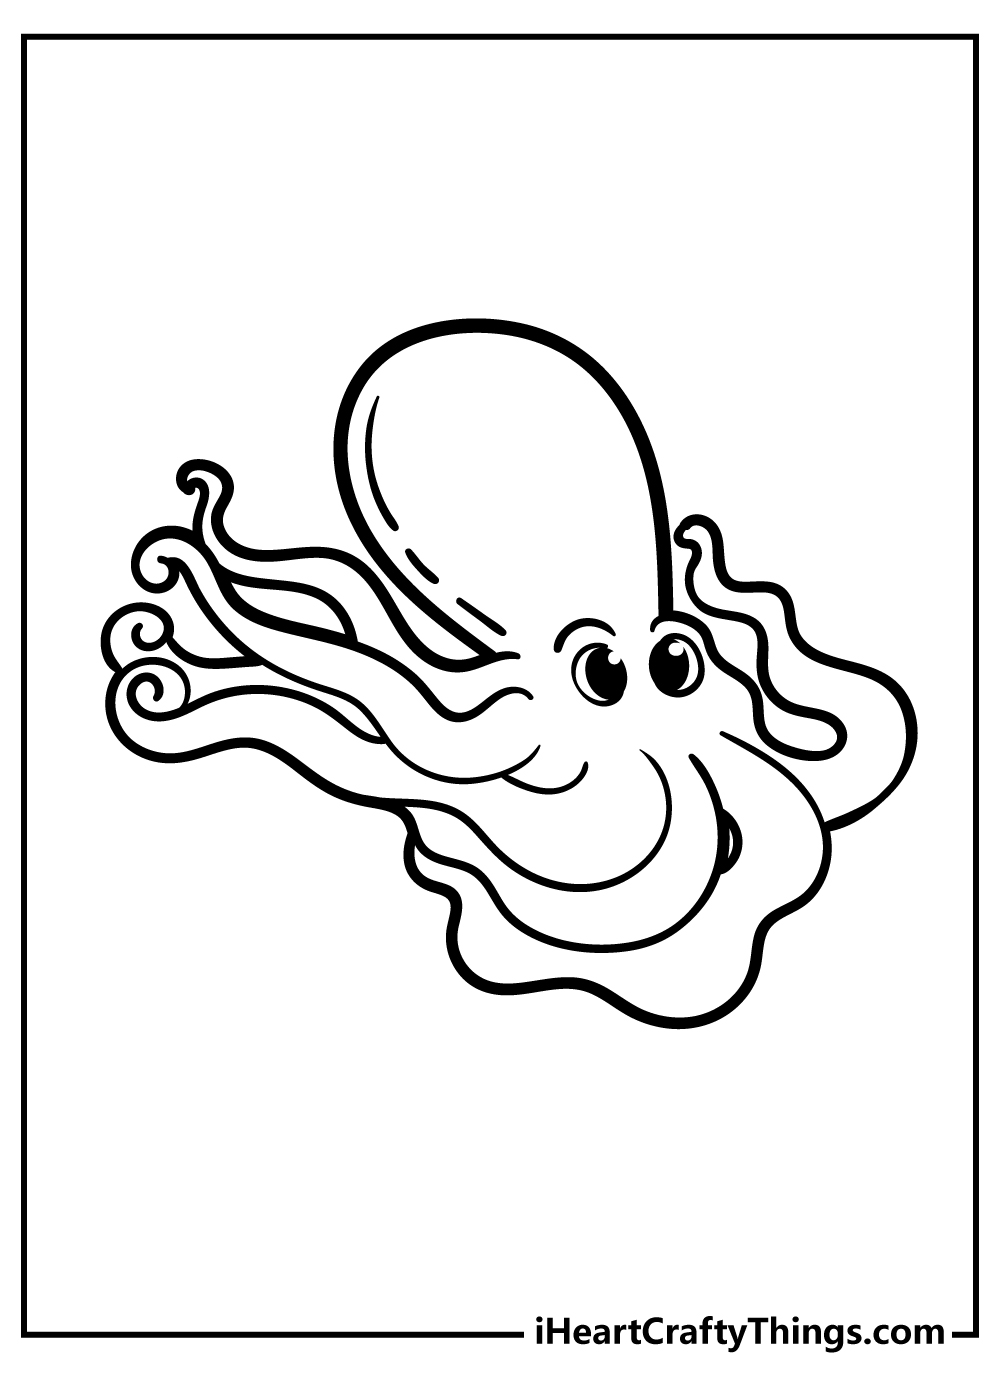 Sea Creature Coloring Sheet for children free download